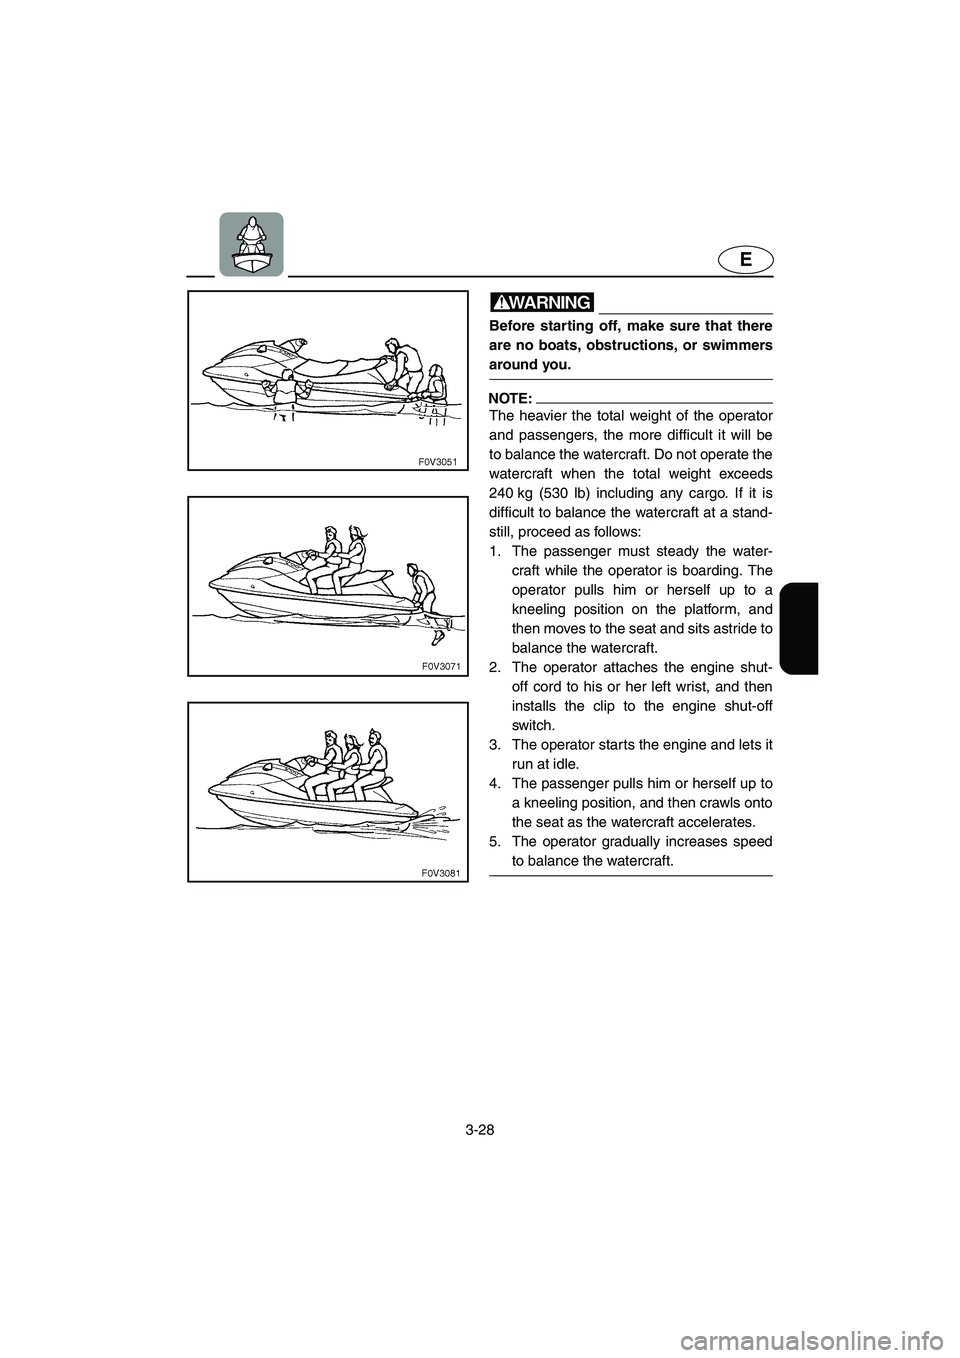 YAMAHA FX HO 2006  Owners Manual 3-28
E
WARNING@ Before starting off, make sure that there
are no boats, obstructions, or swimmers
around you. 
@
NOTE:@ The heavier the total weight of the operator
and passengers, the more difficult 